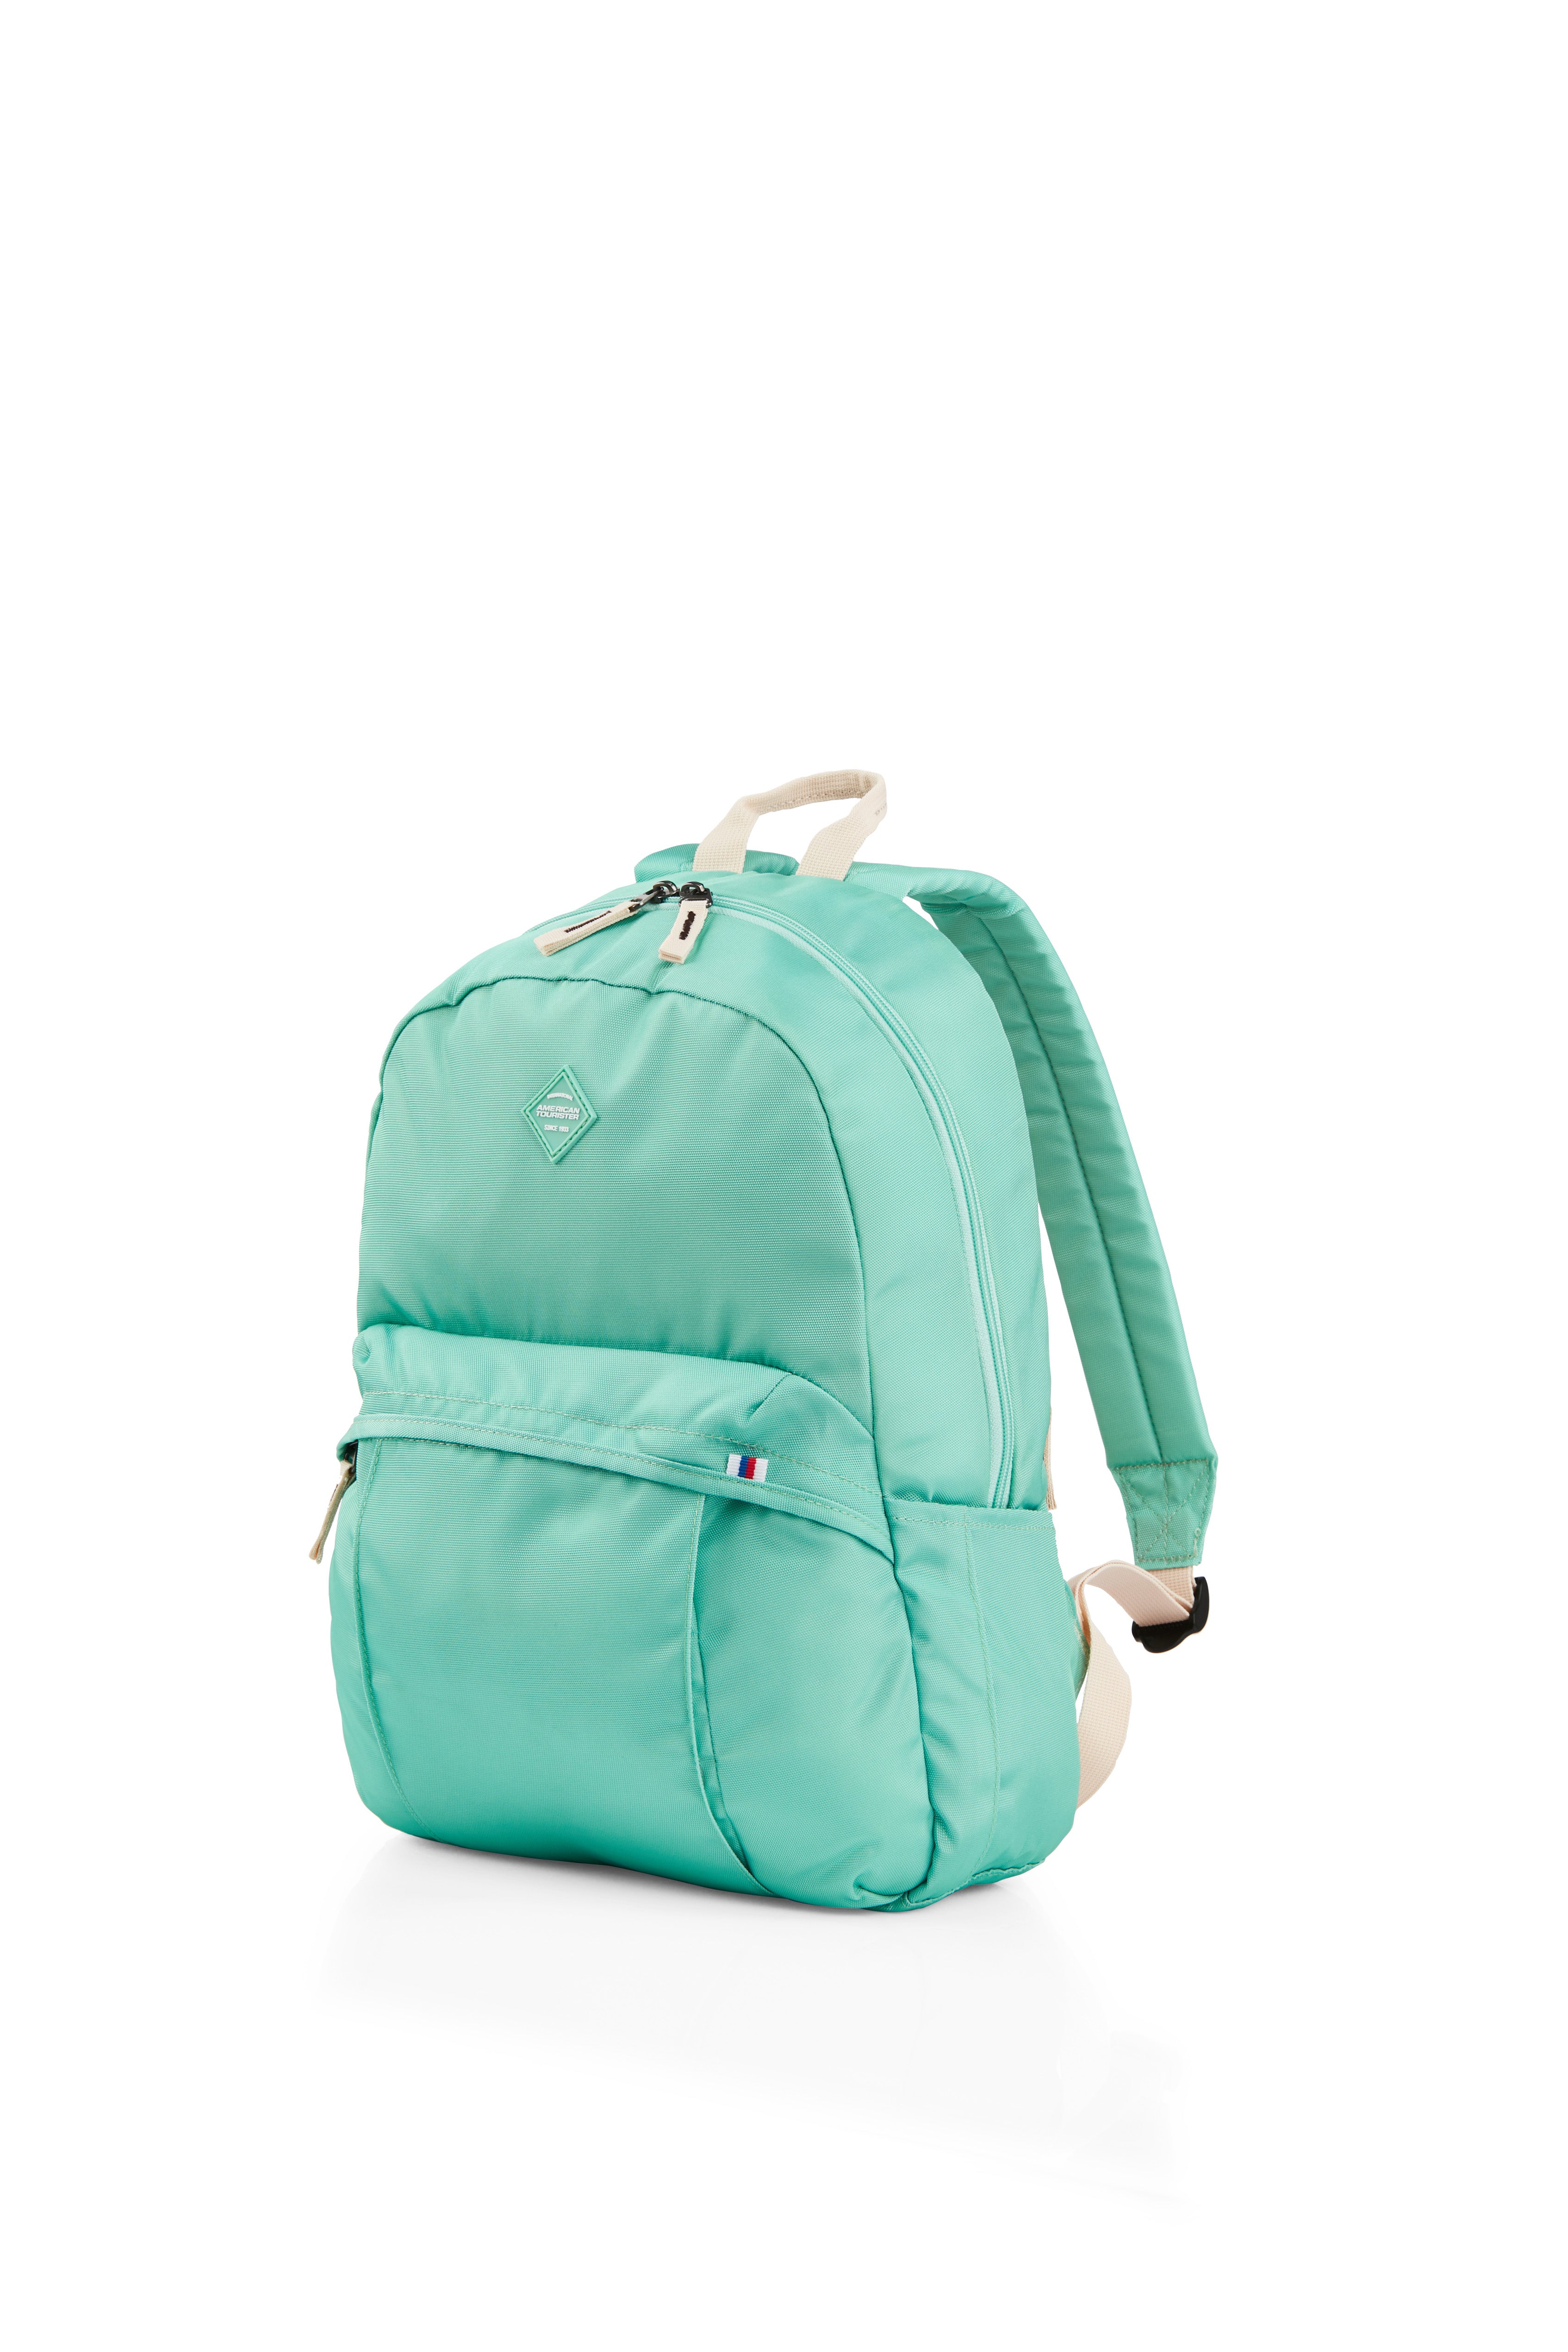 American Tourister - RUDY Small Fashion Backpack - Ice Mint-1